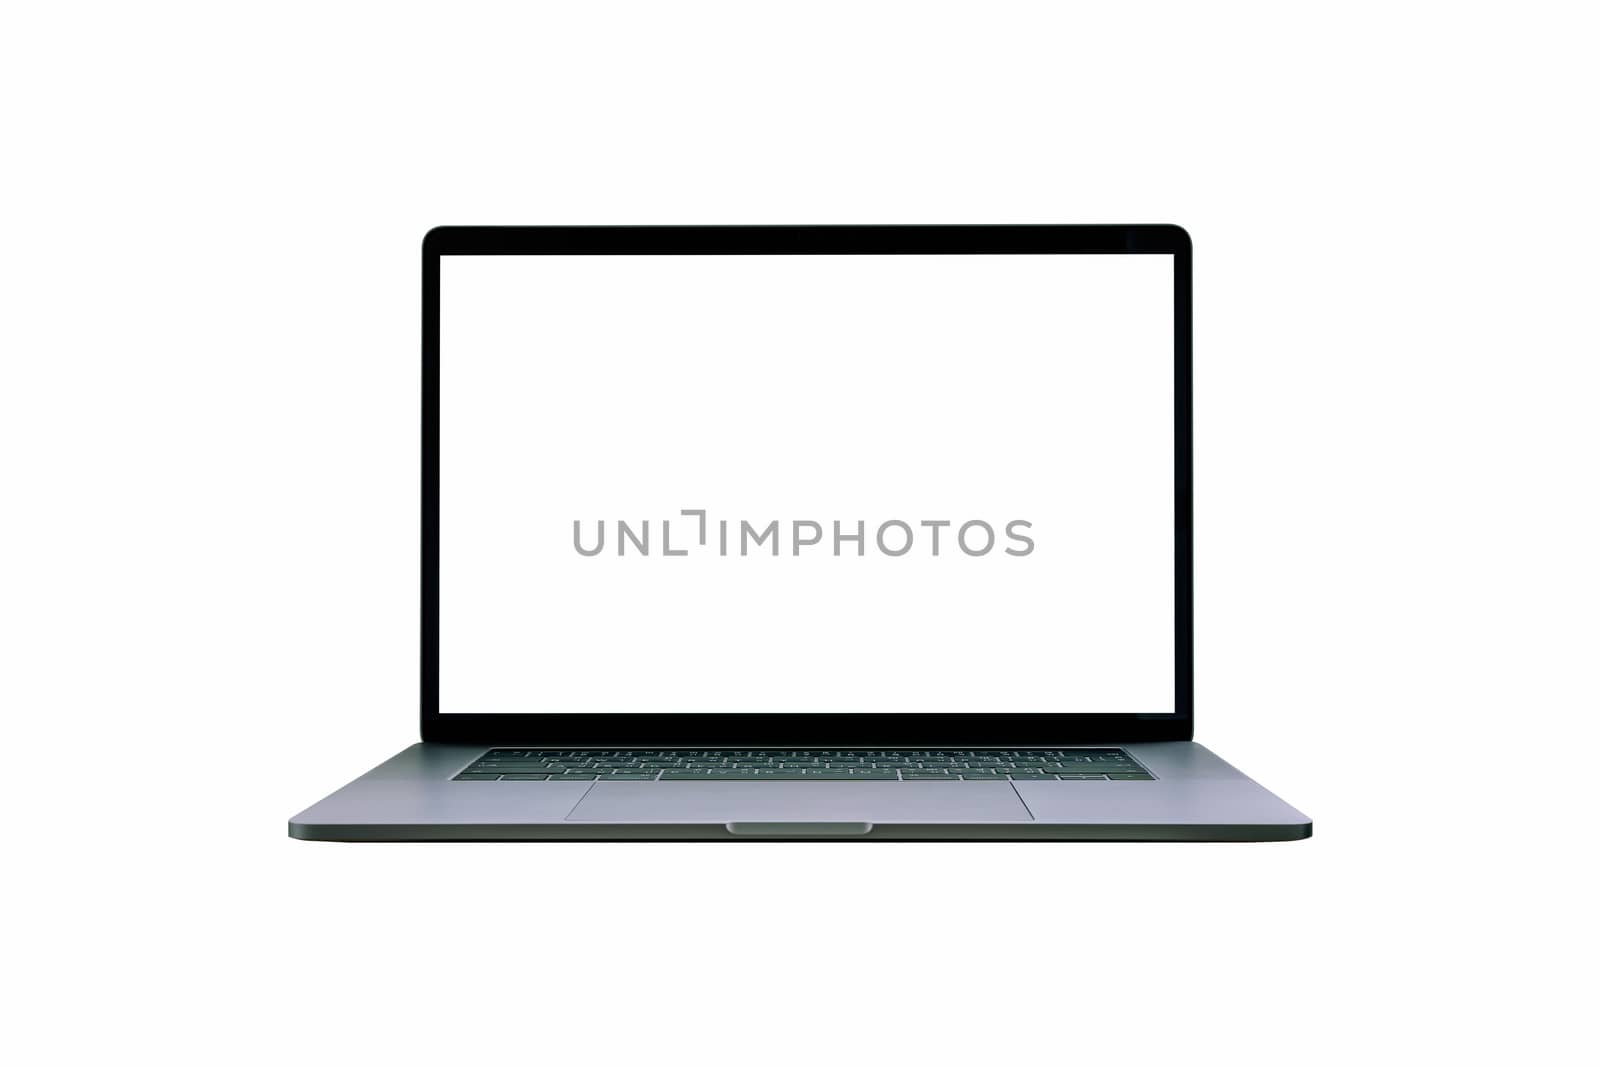 Computer laptop isolated on white background. by gutarphotoghaphy